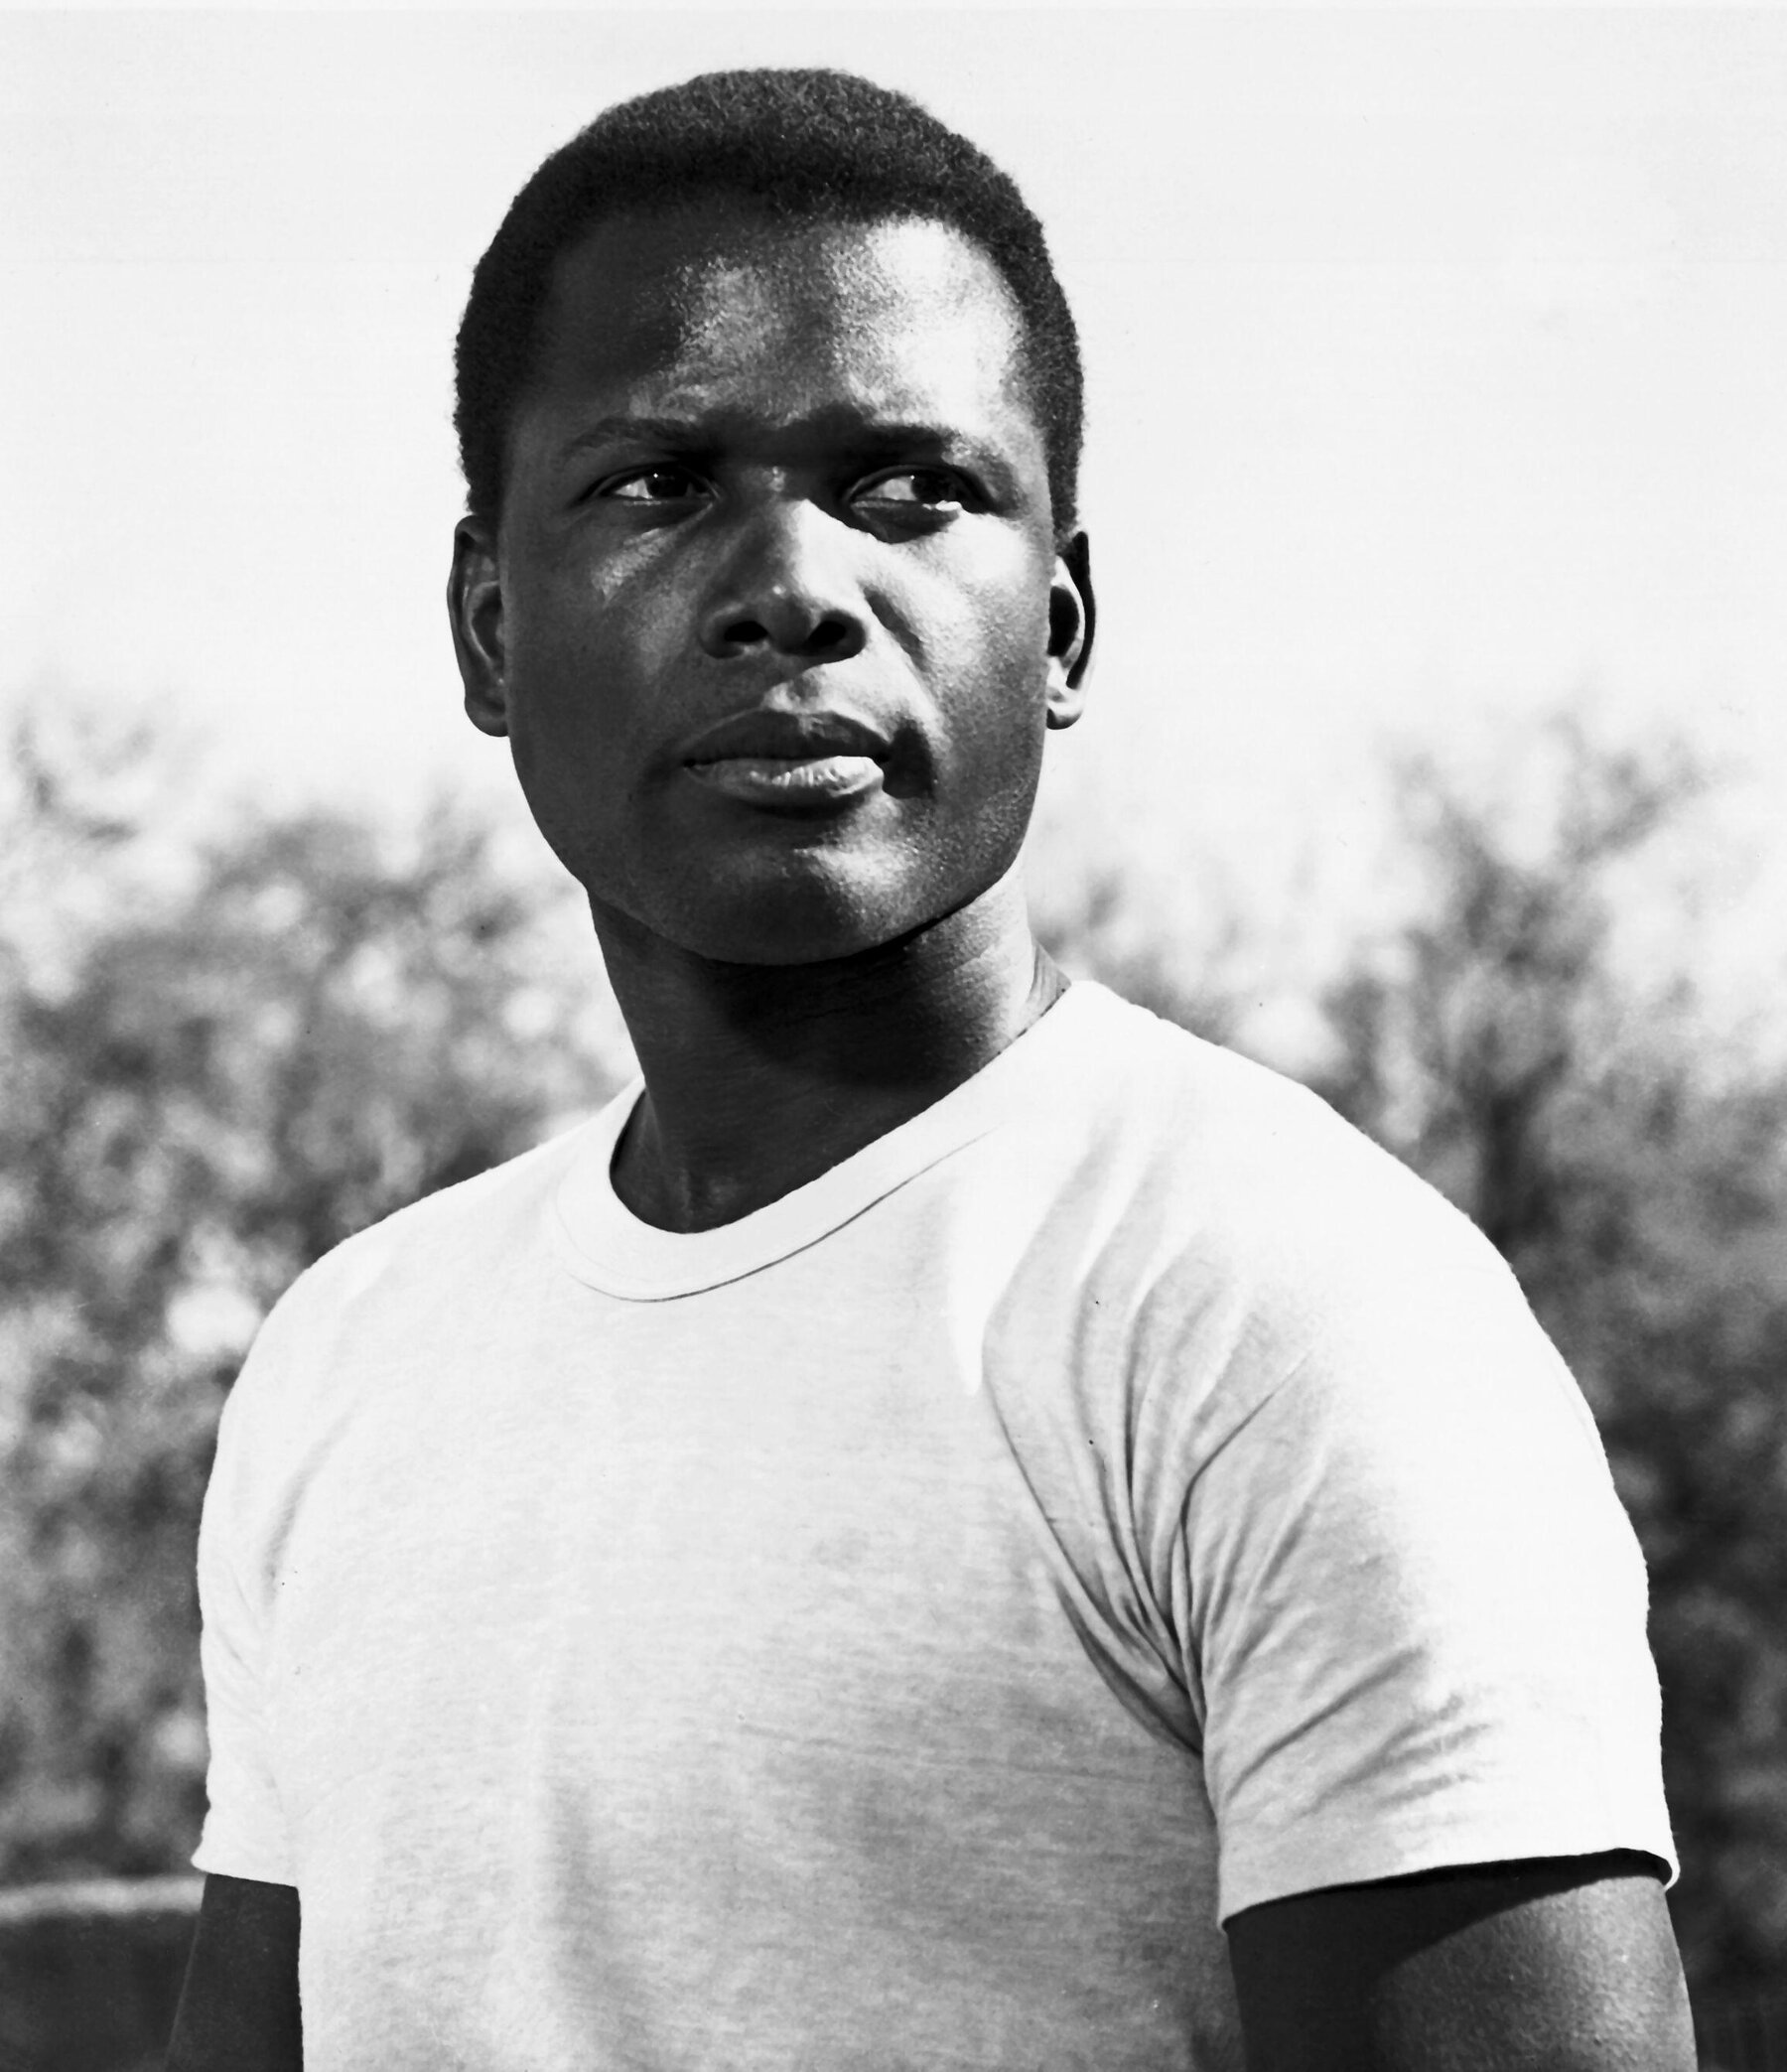 Sidney Poitier - The Ultimate Self-Made Black Man Who Won Academy Award